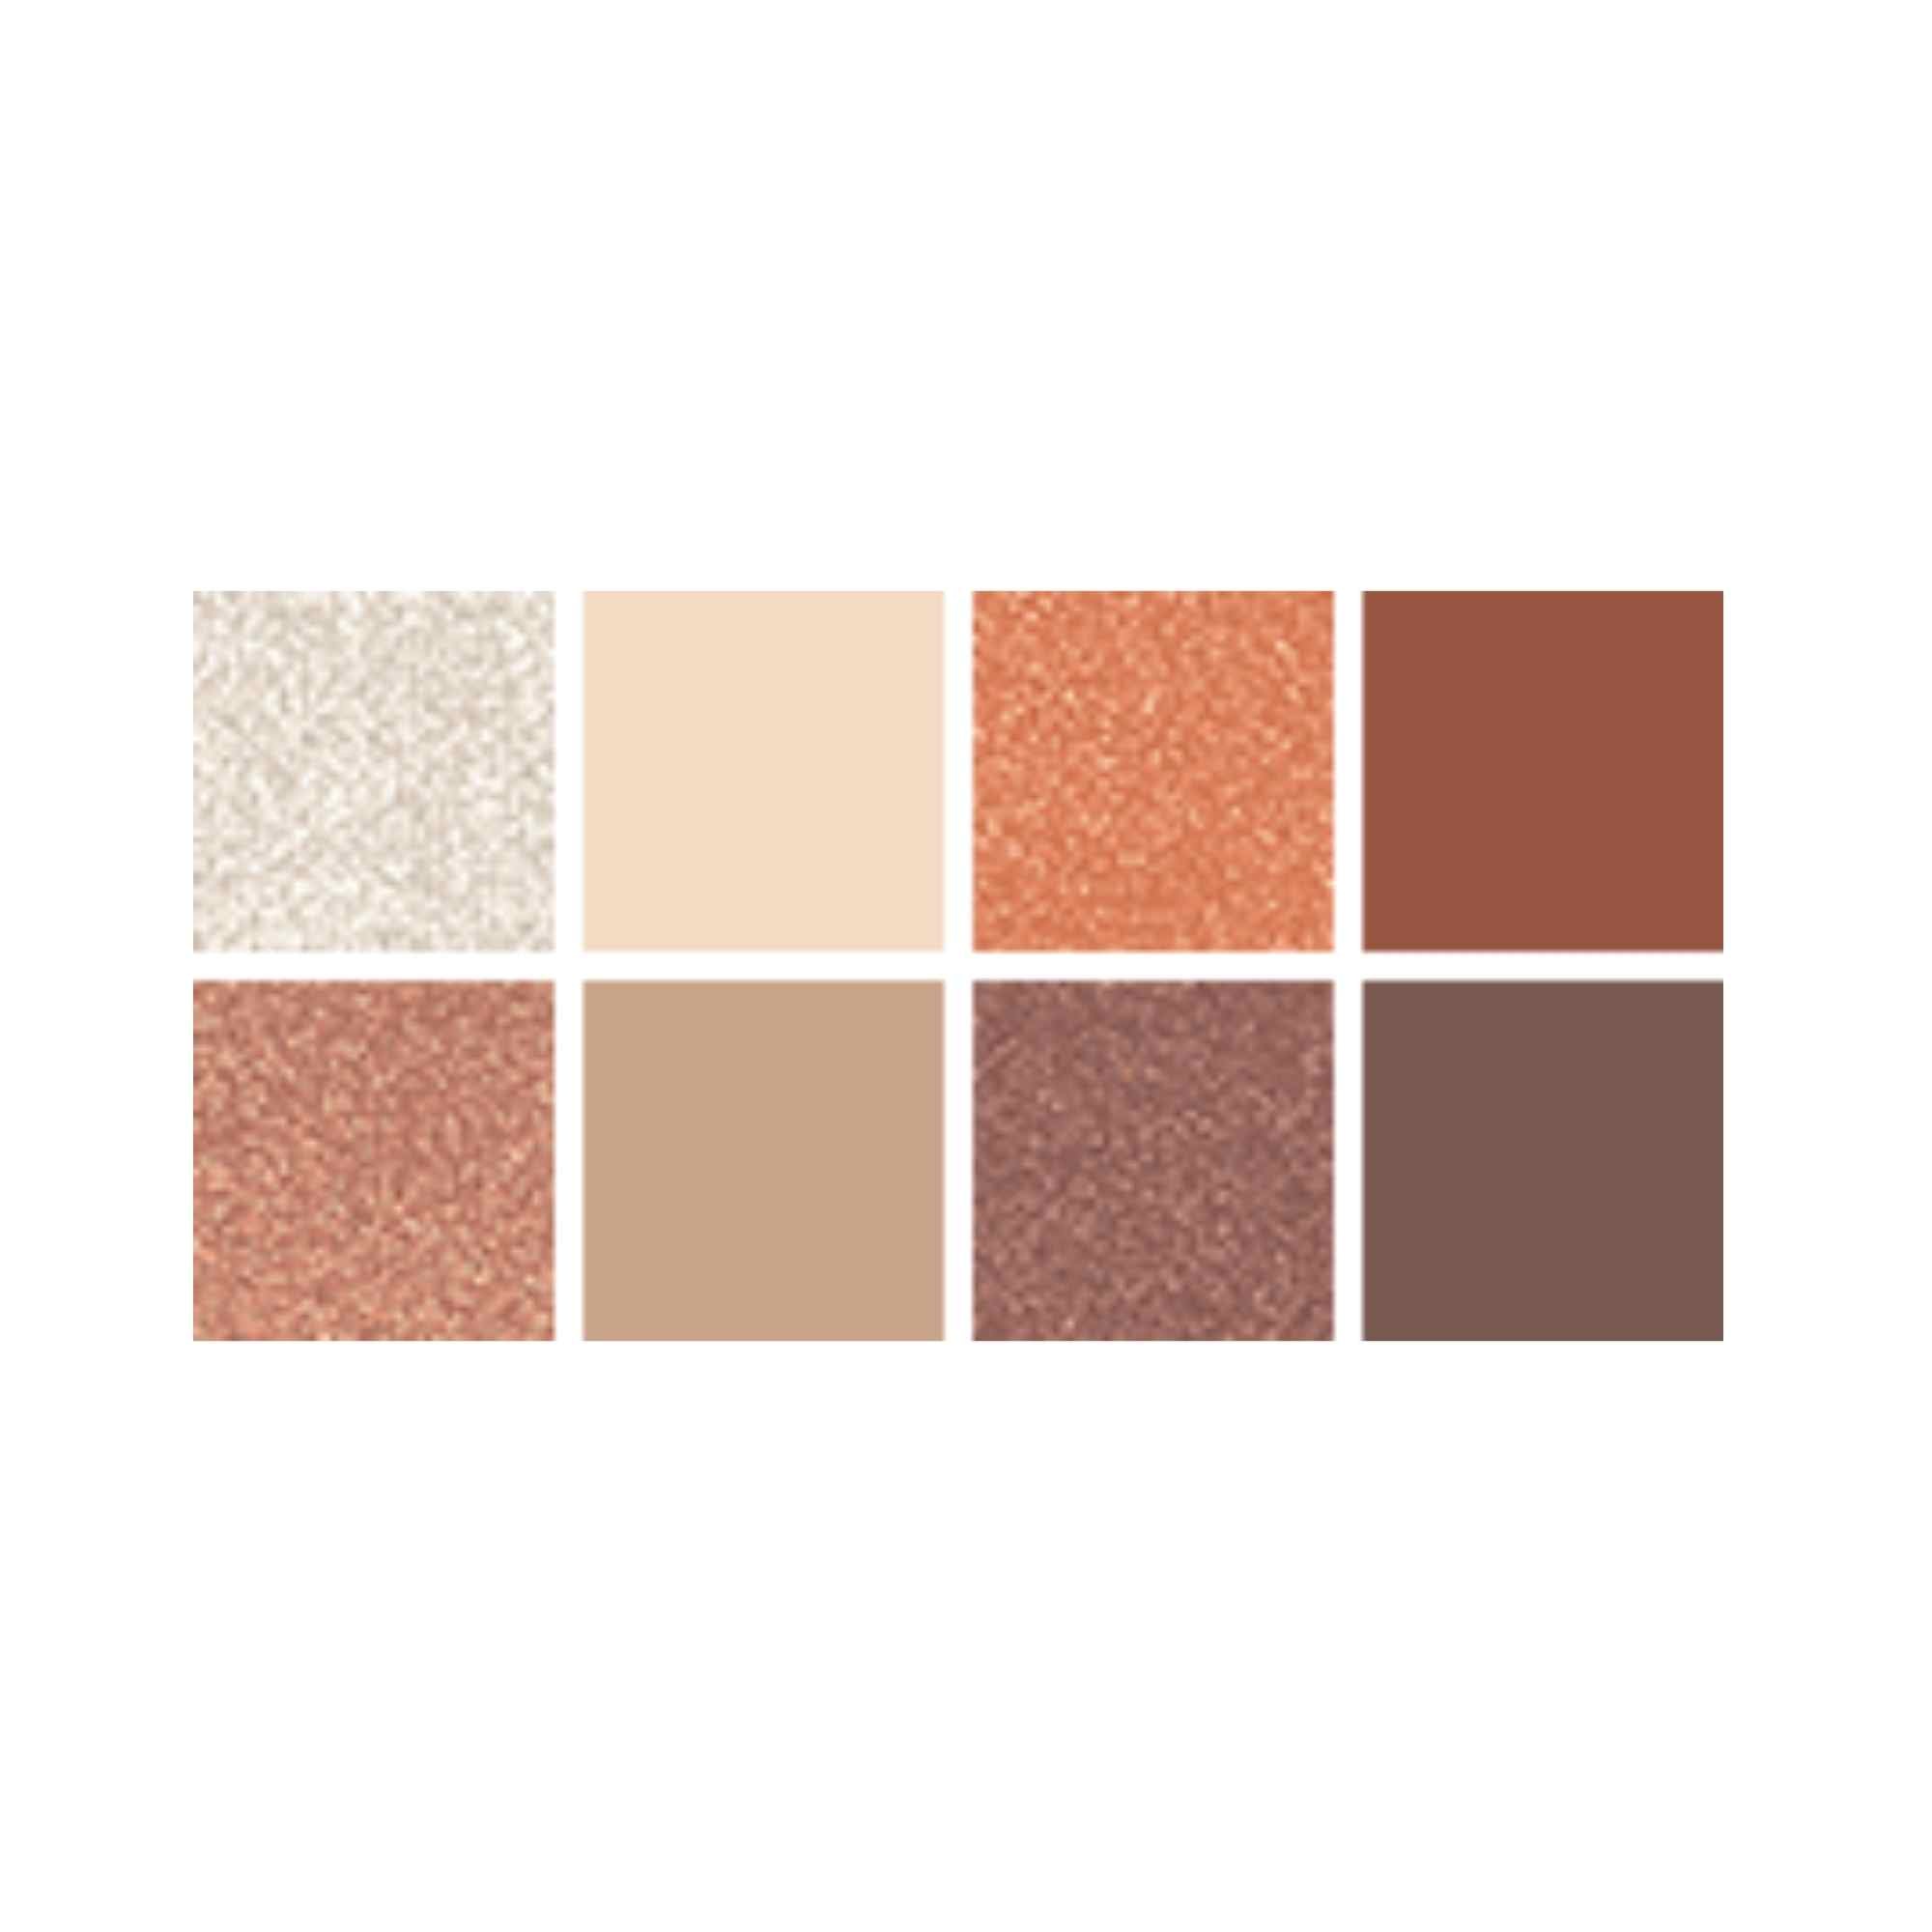 Catrice The Hot Mocca Eyeshadow Palette Swatches